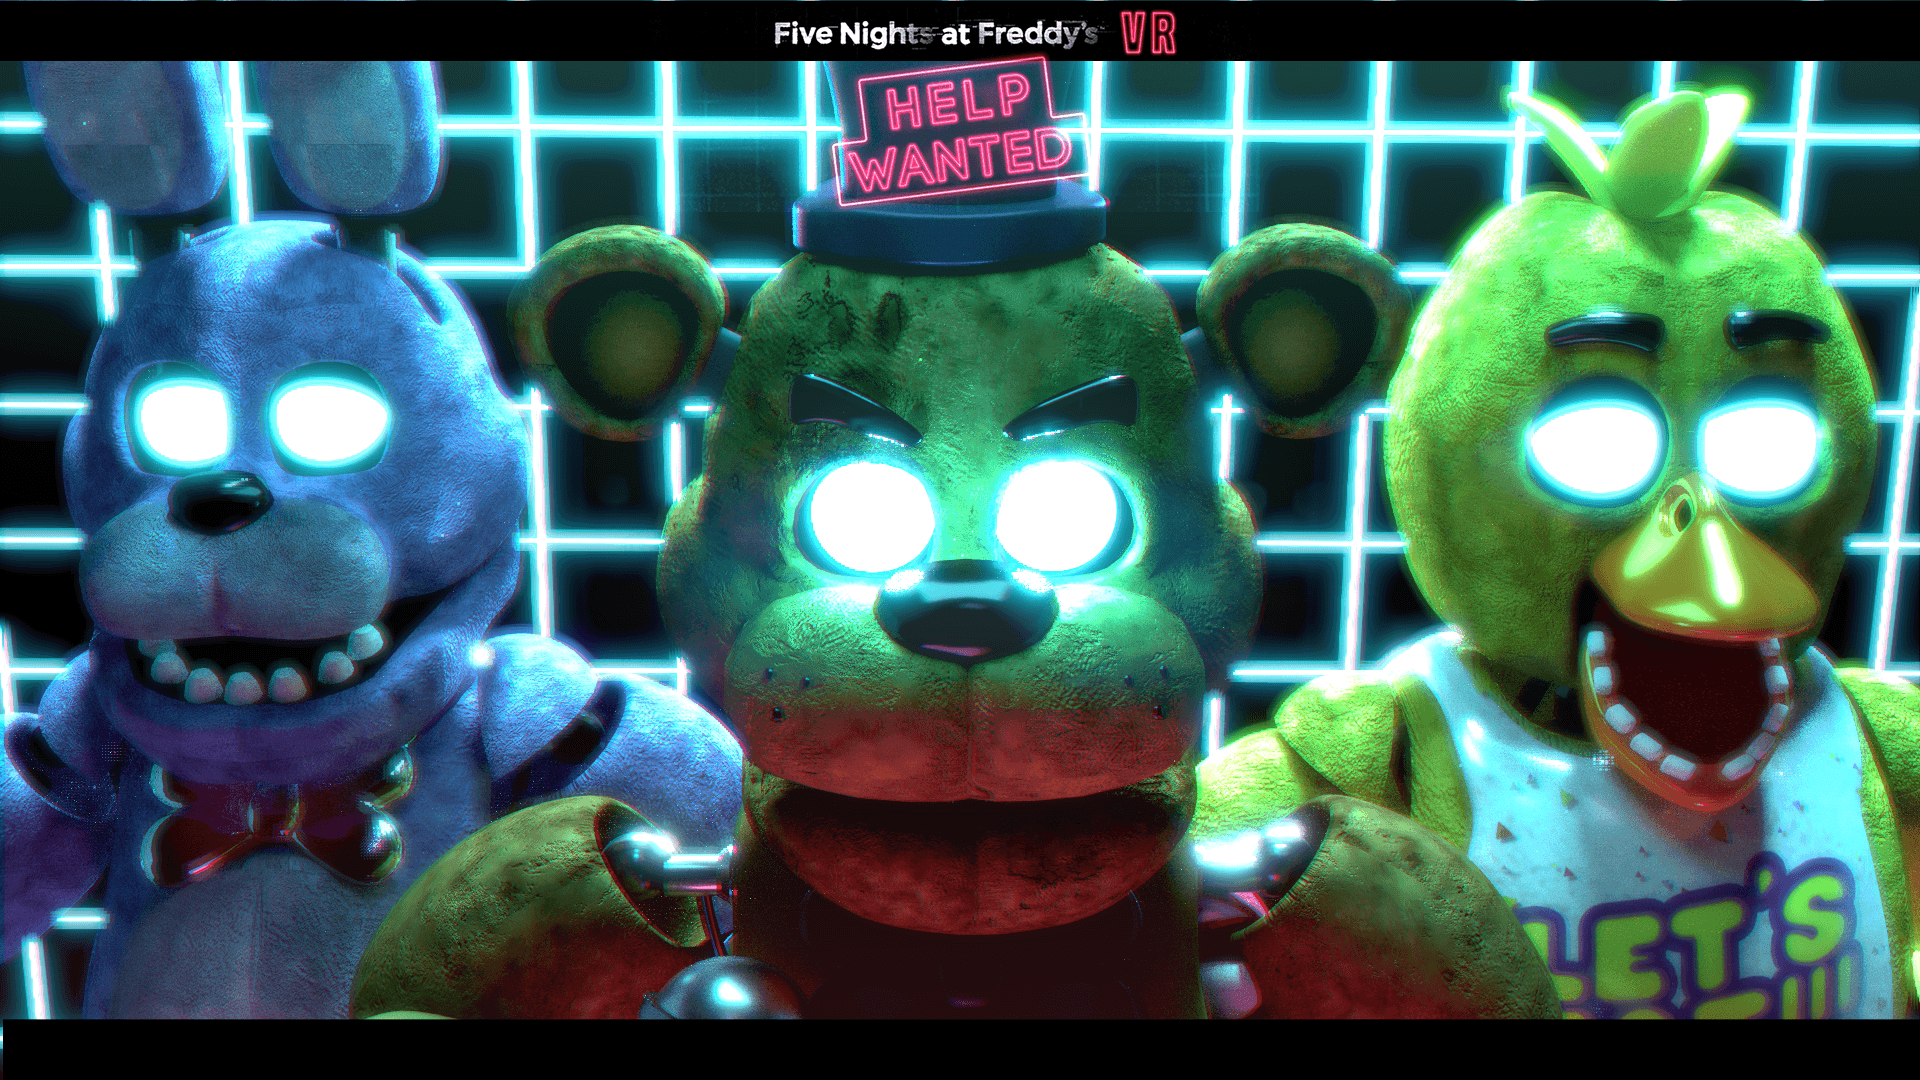 Five Nights at Freddy's VR Help Wanted cycles render